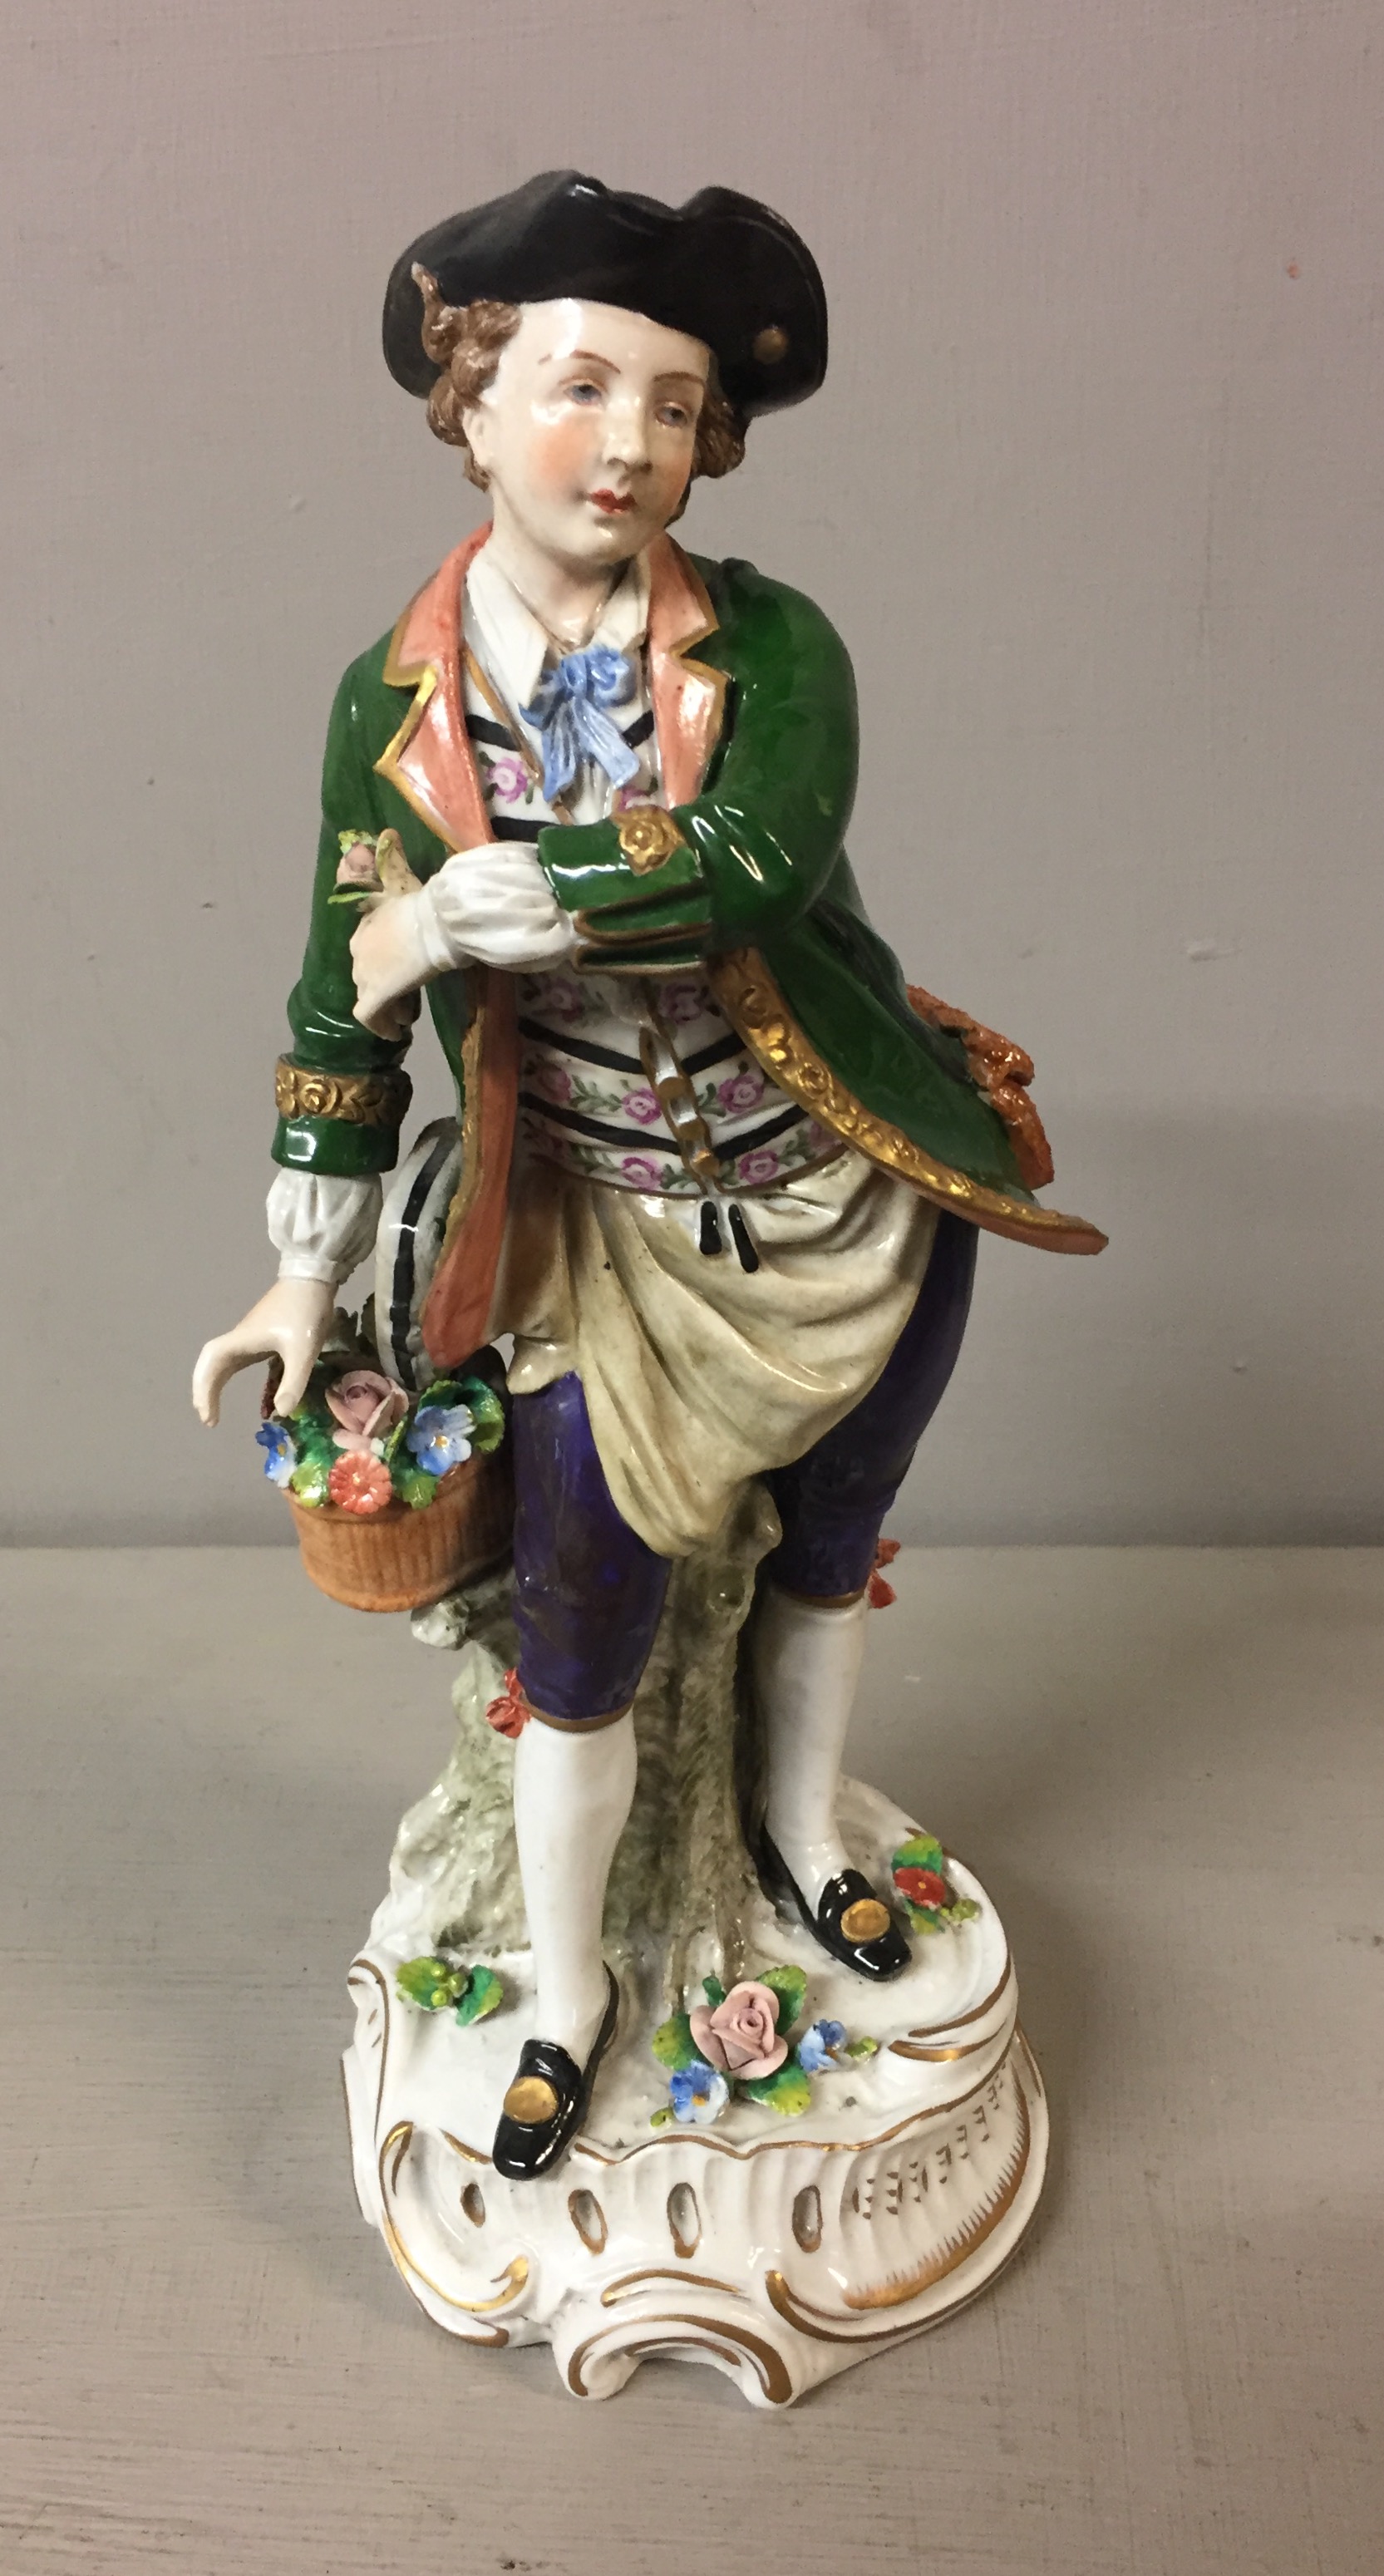 SITZENDORF, A 20TH CENTURY PORCELAIN FIGURE OF A GENTLEMAN GARDENER Of the 18th Century in a tricorn